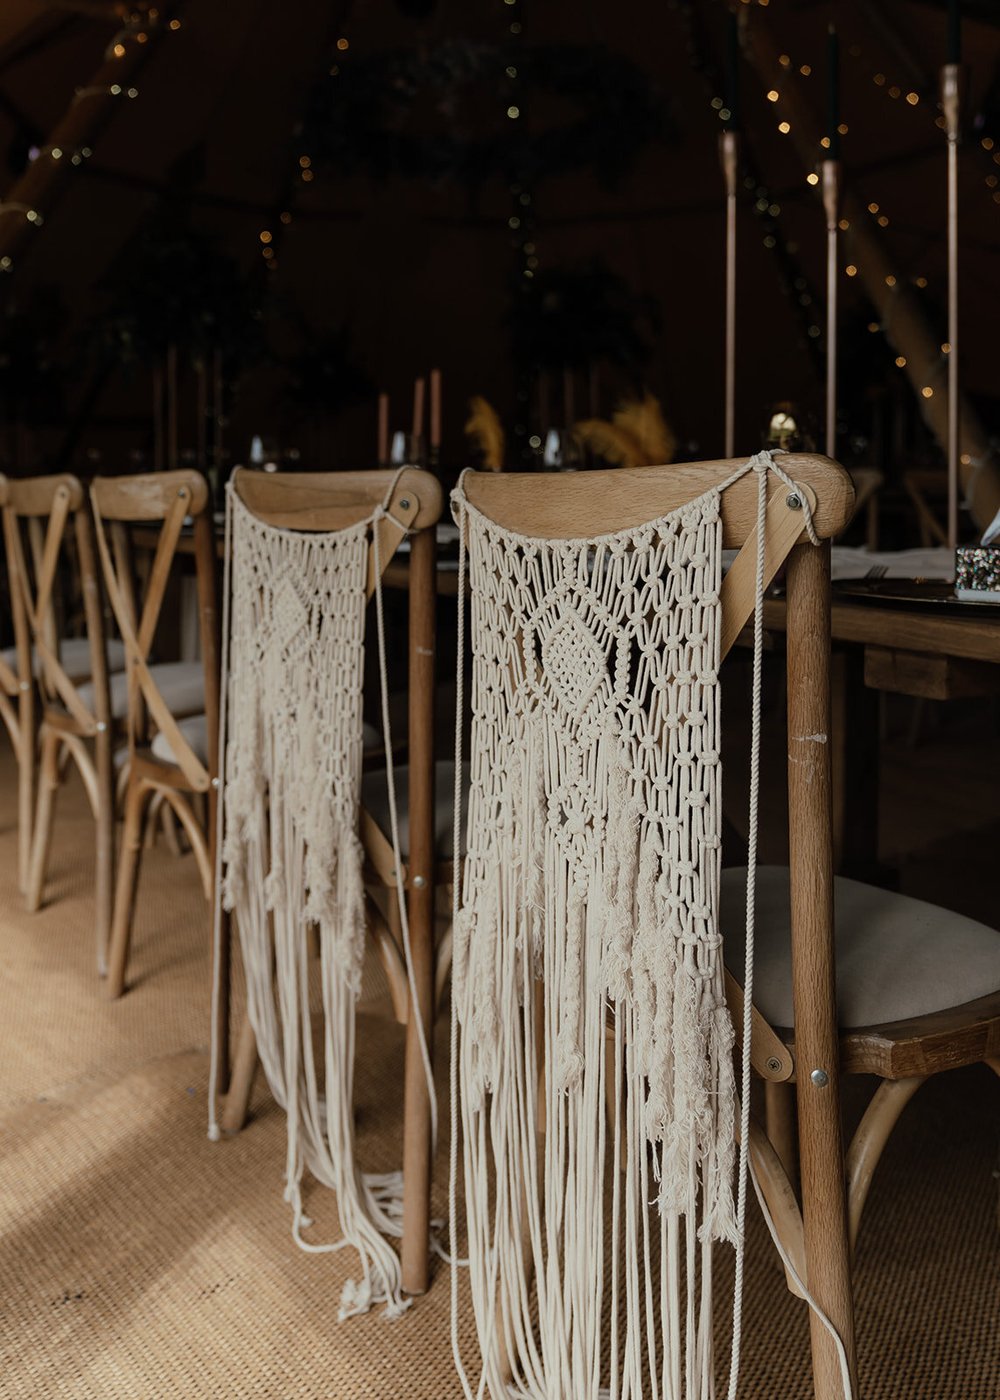 macrame bride and groom chair covers in tipi with wooden chairs